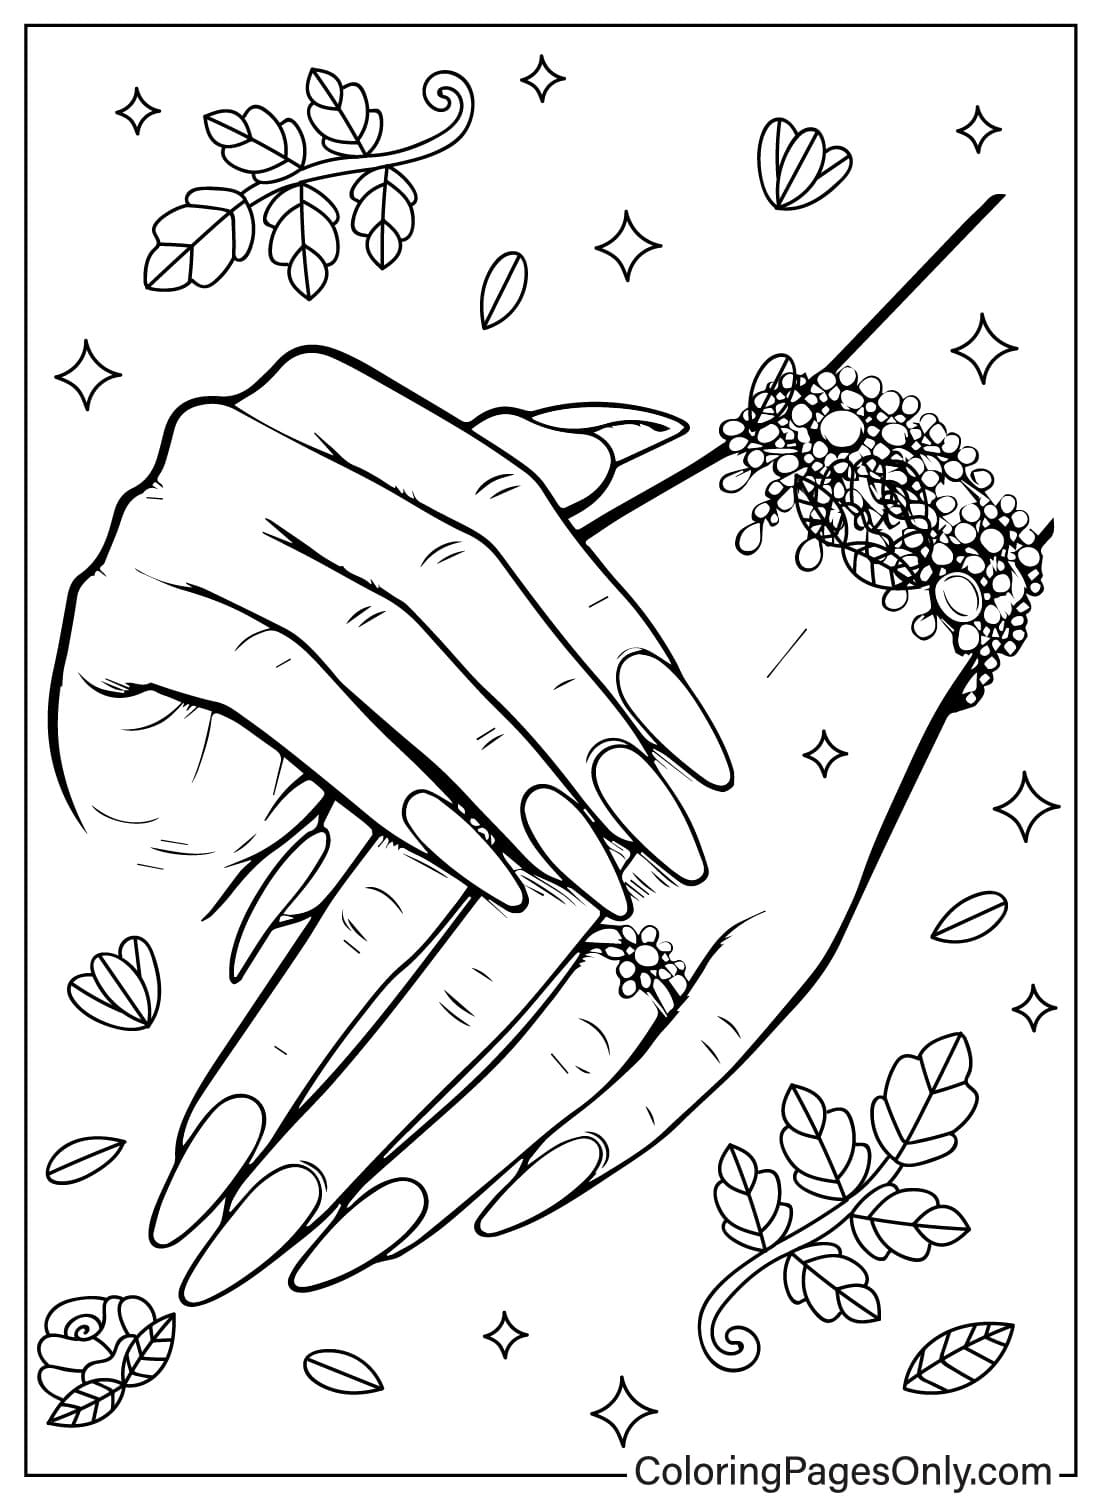 Nails Coloring Page Coloring Page